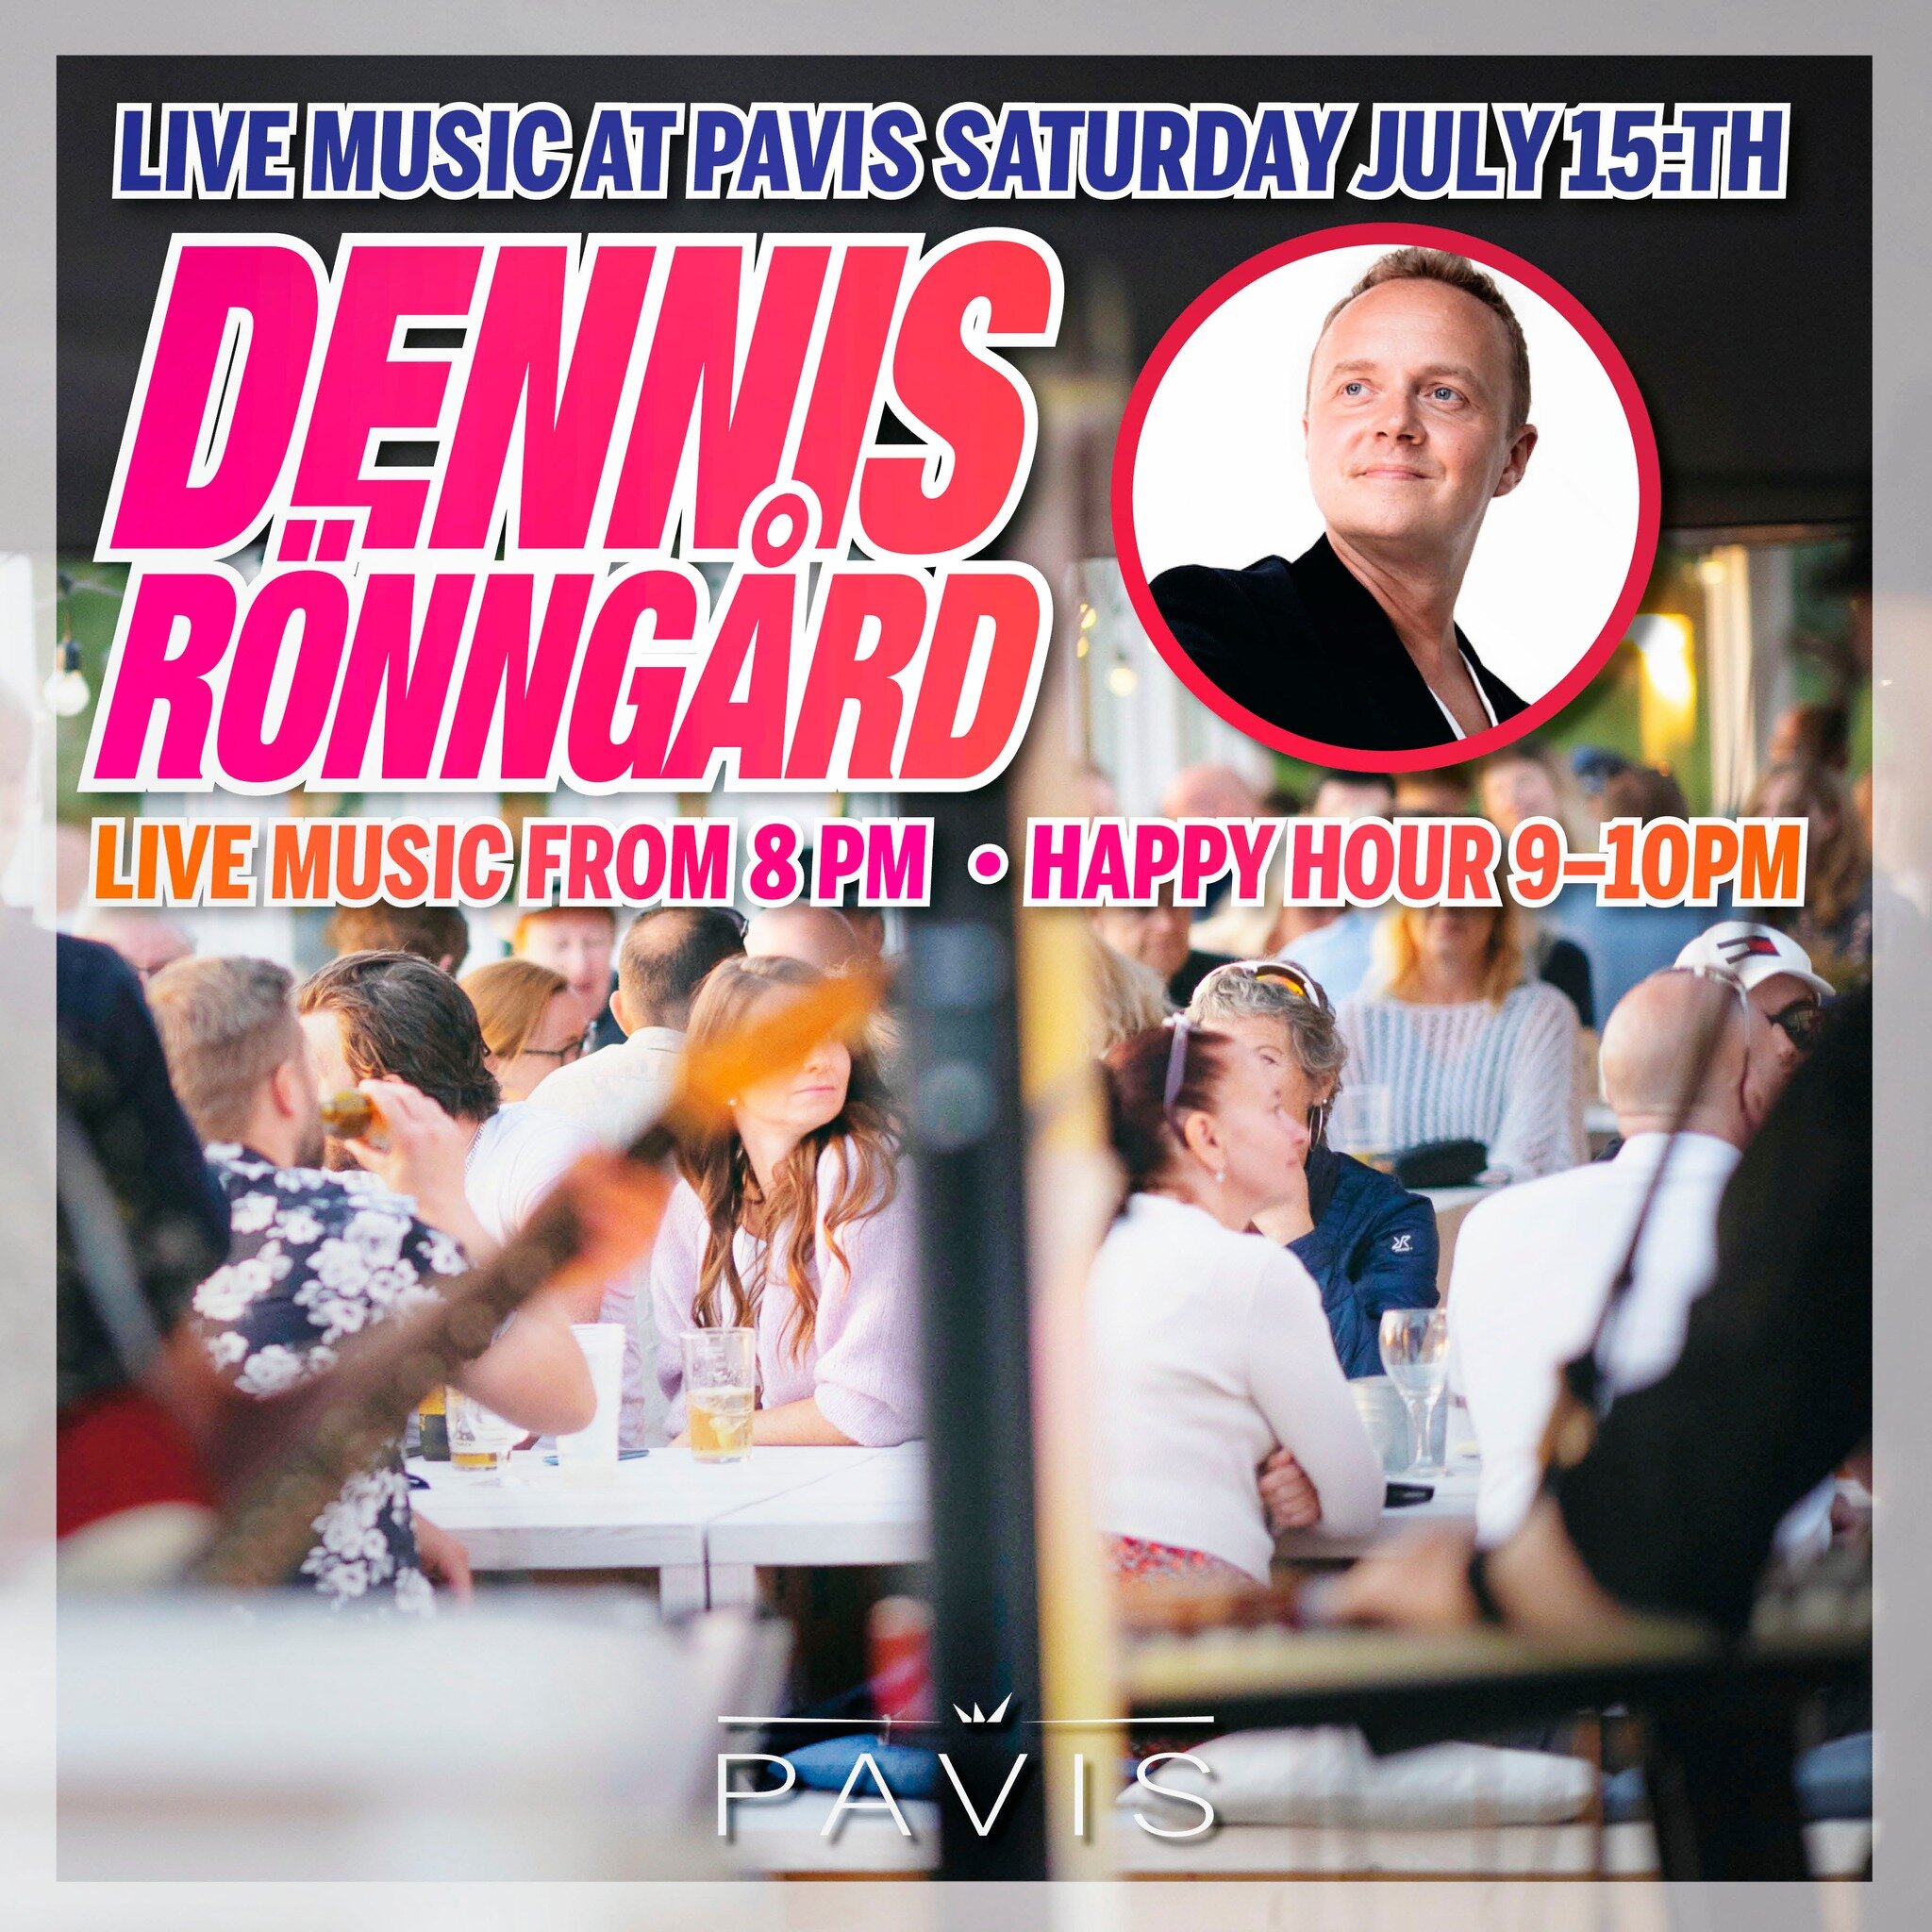 Live on stage at Pavis Saturday 15.7 starting 8 pm &ndash; Dennis R&ouml;nng&aring;rd! Happy hour from 9 pm to 10 pm! 🎶🍻🥂👌🏻 Welcome!